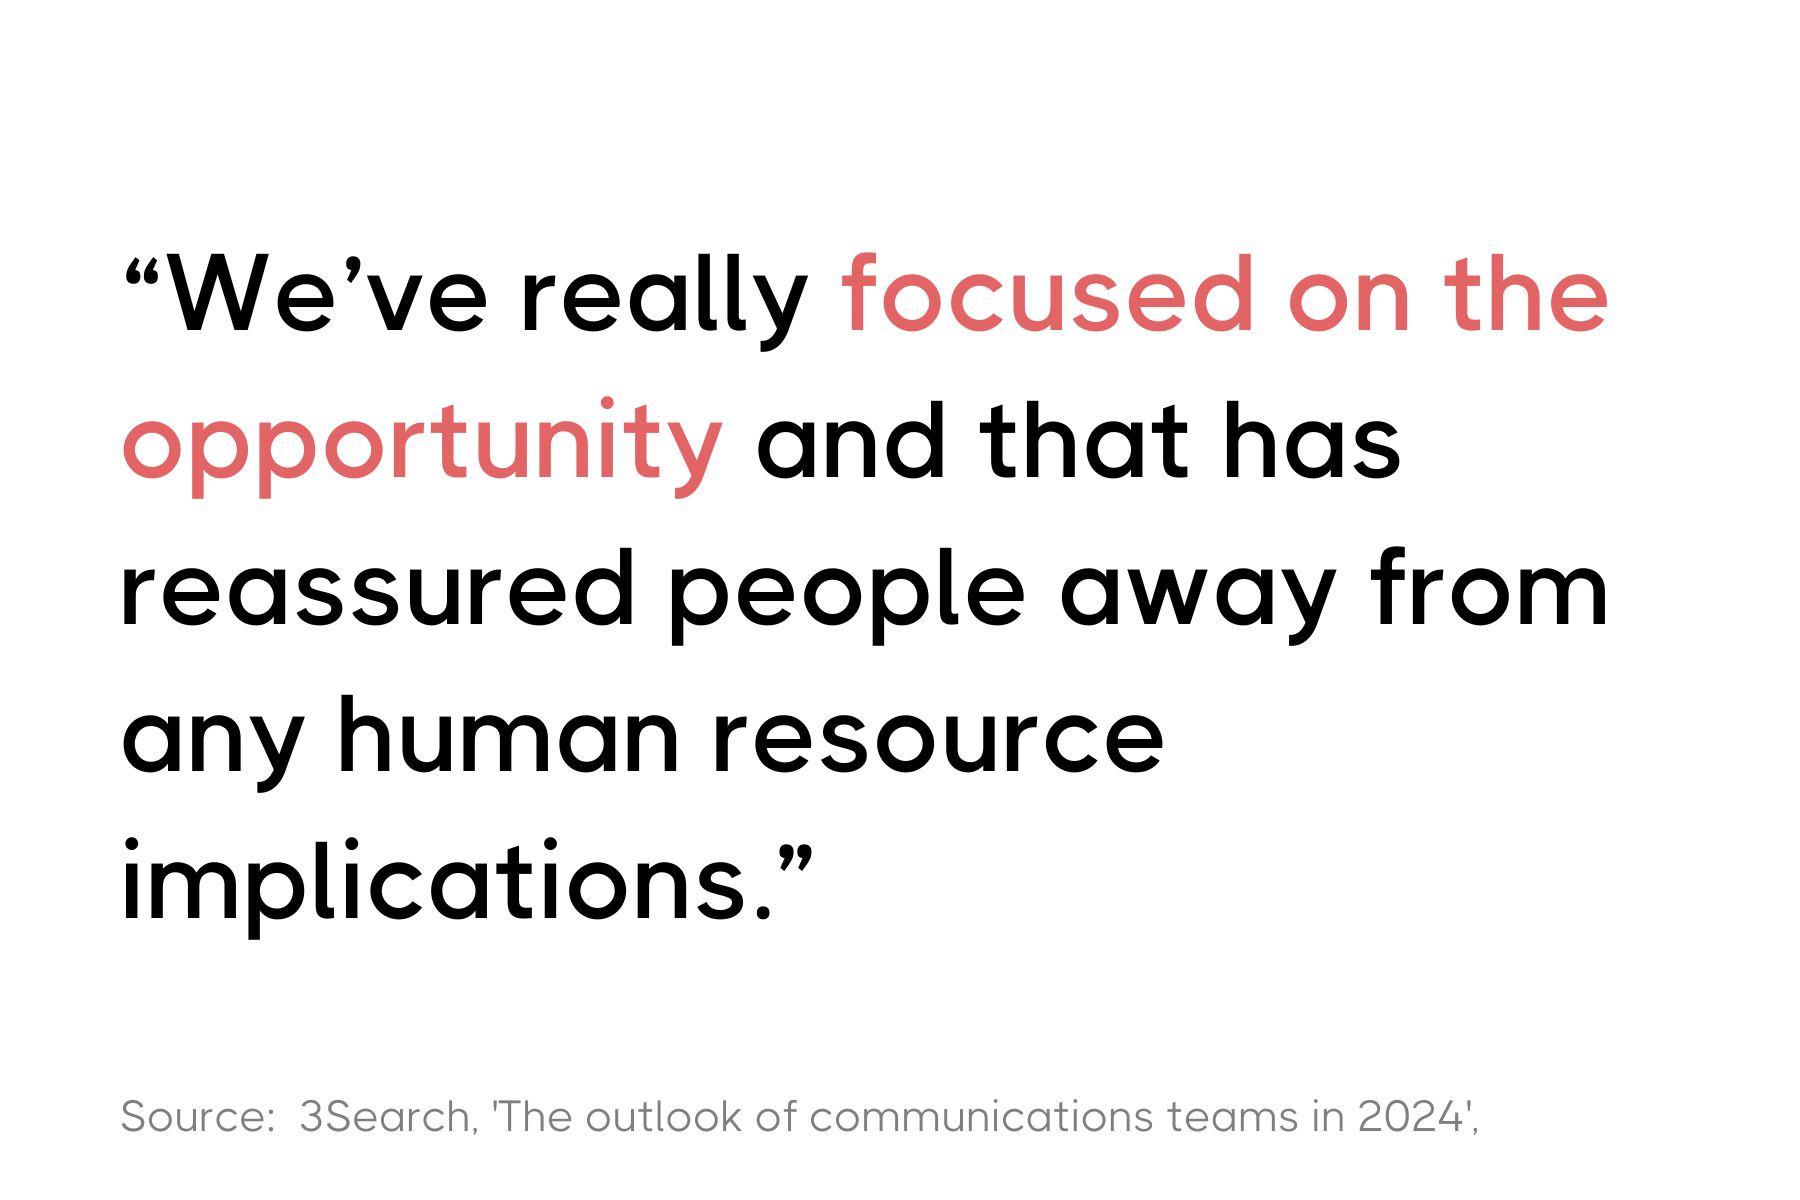 A graphic featuring the quote: "We've really focused on the opportunity and that has reassured people away from any human resource implications." The text is displayed in red and black, cited from a source titled 'The outlook of communications teams in 2024' by 3Search.